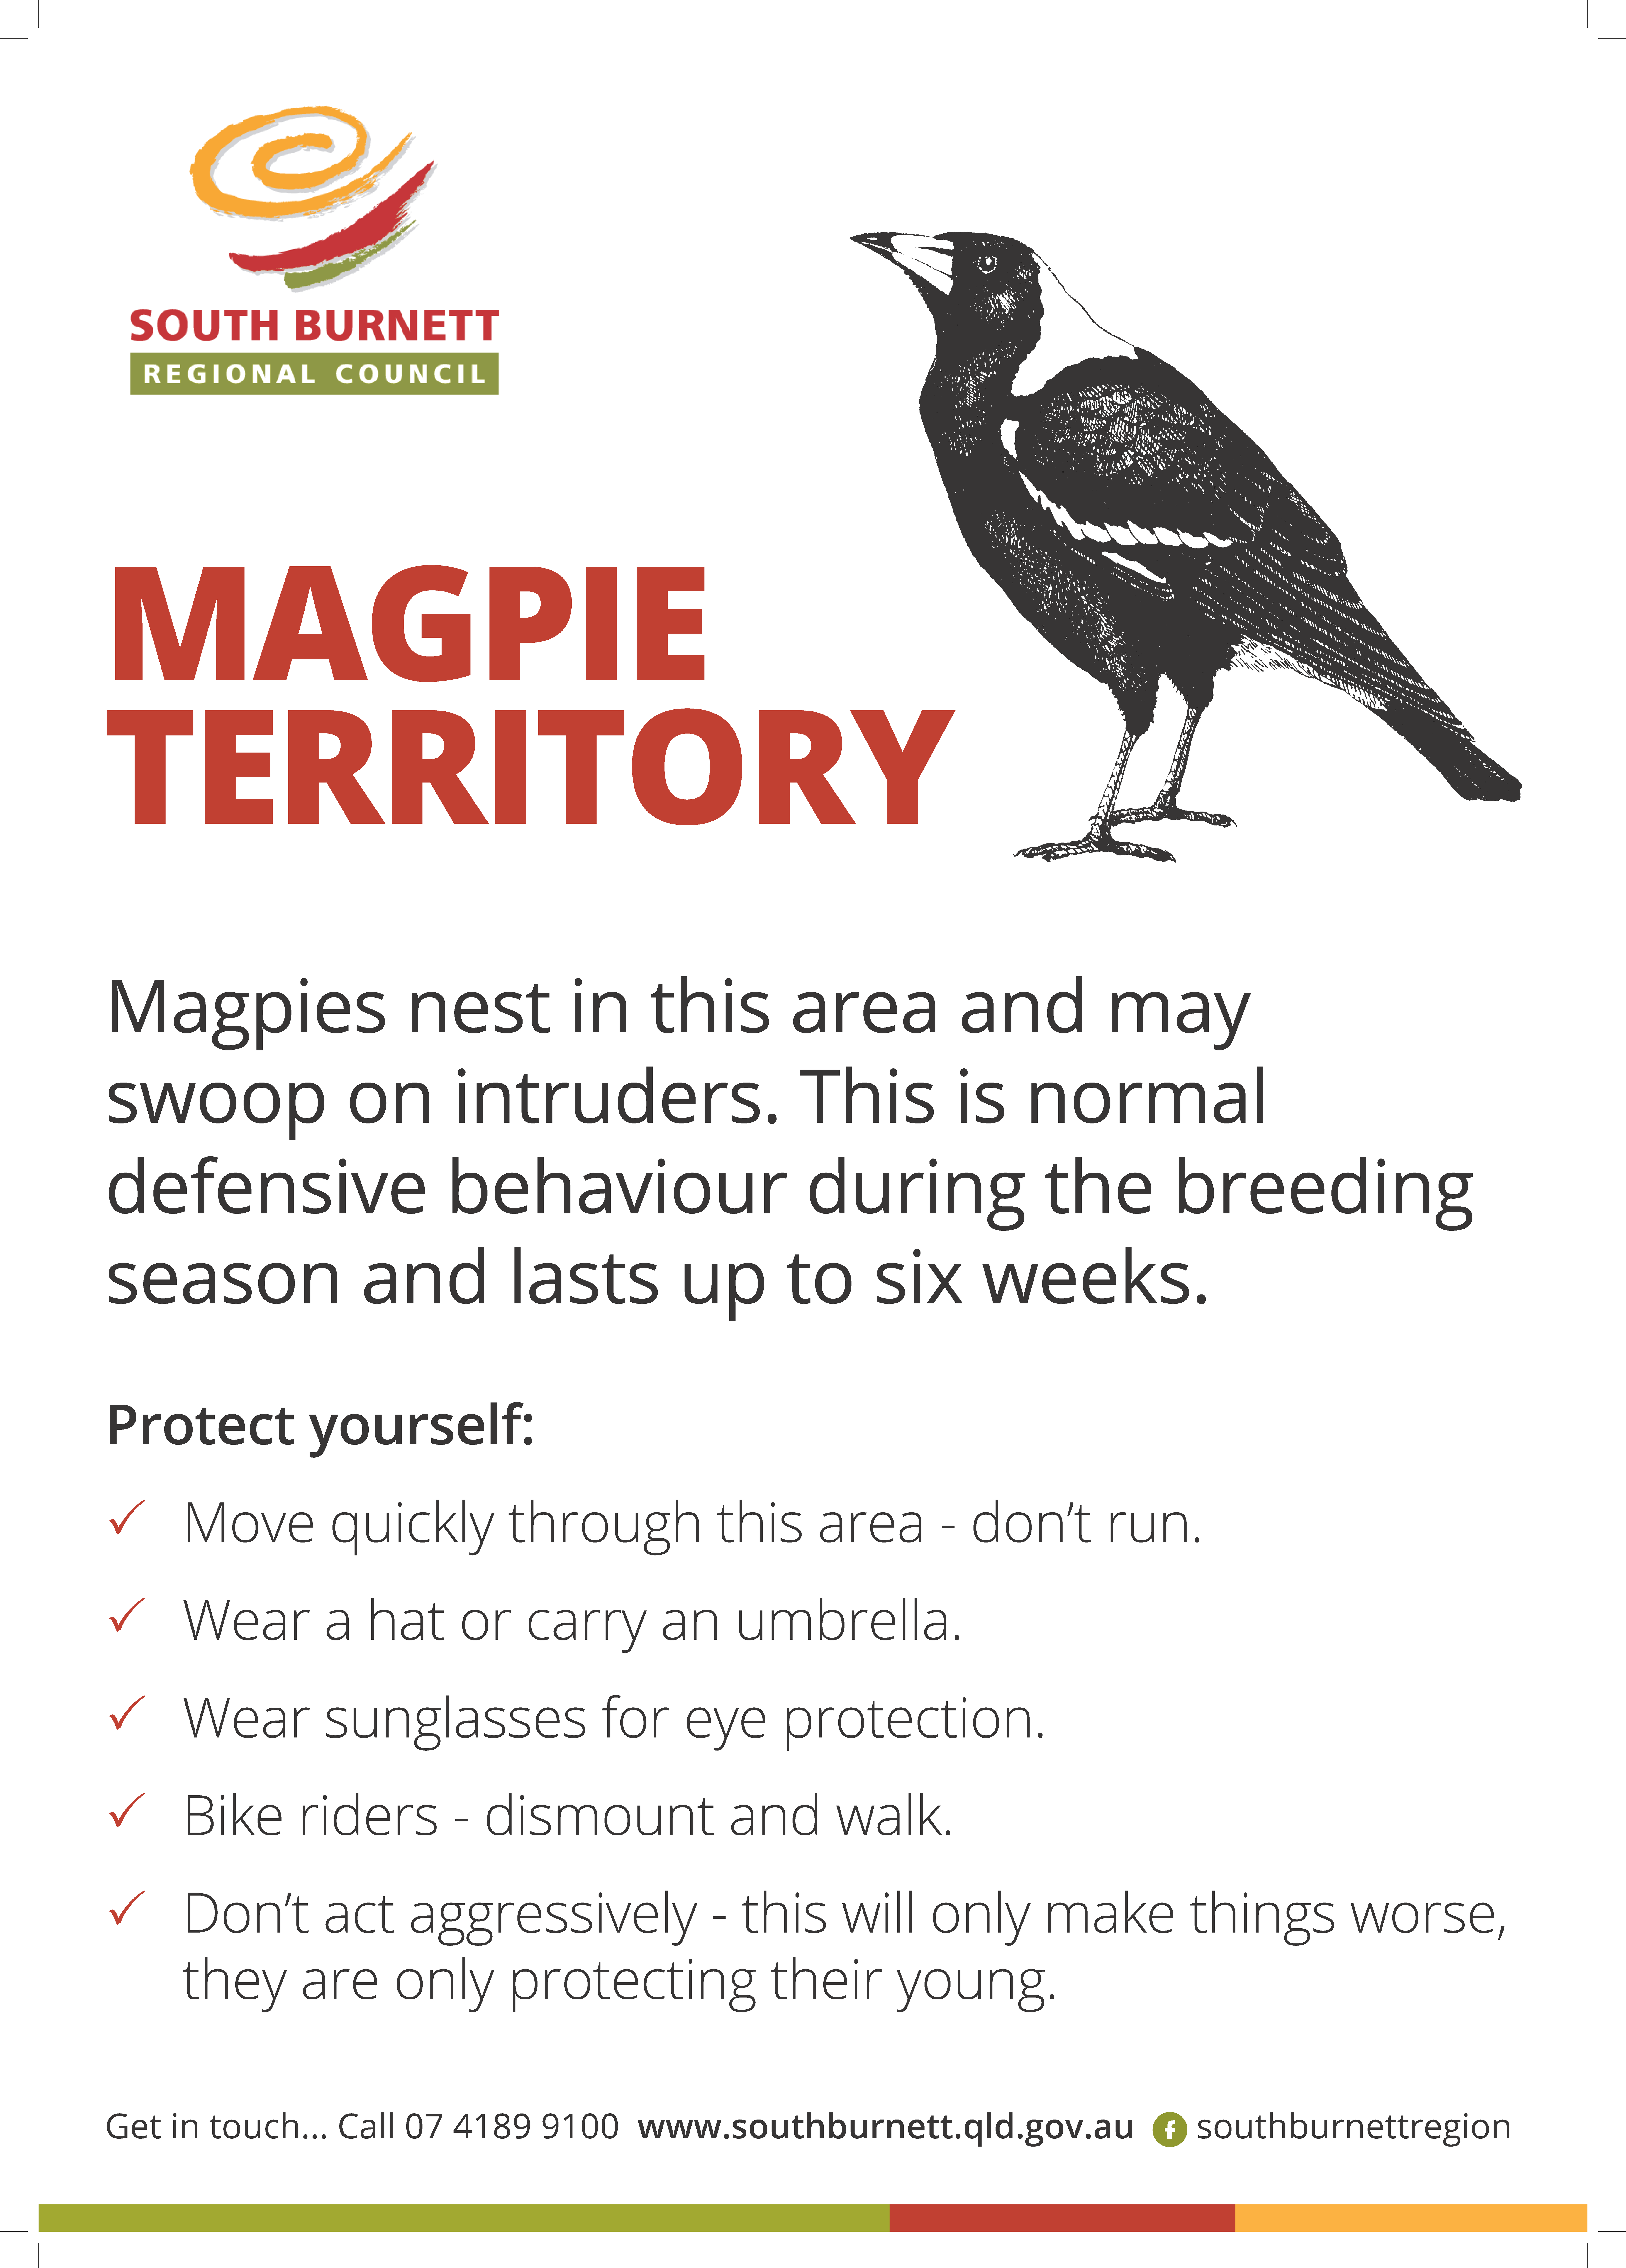 Stay safe during magpie swooping season